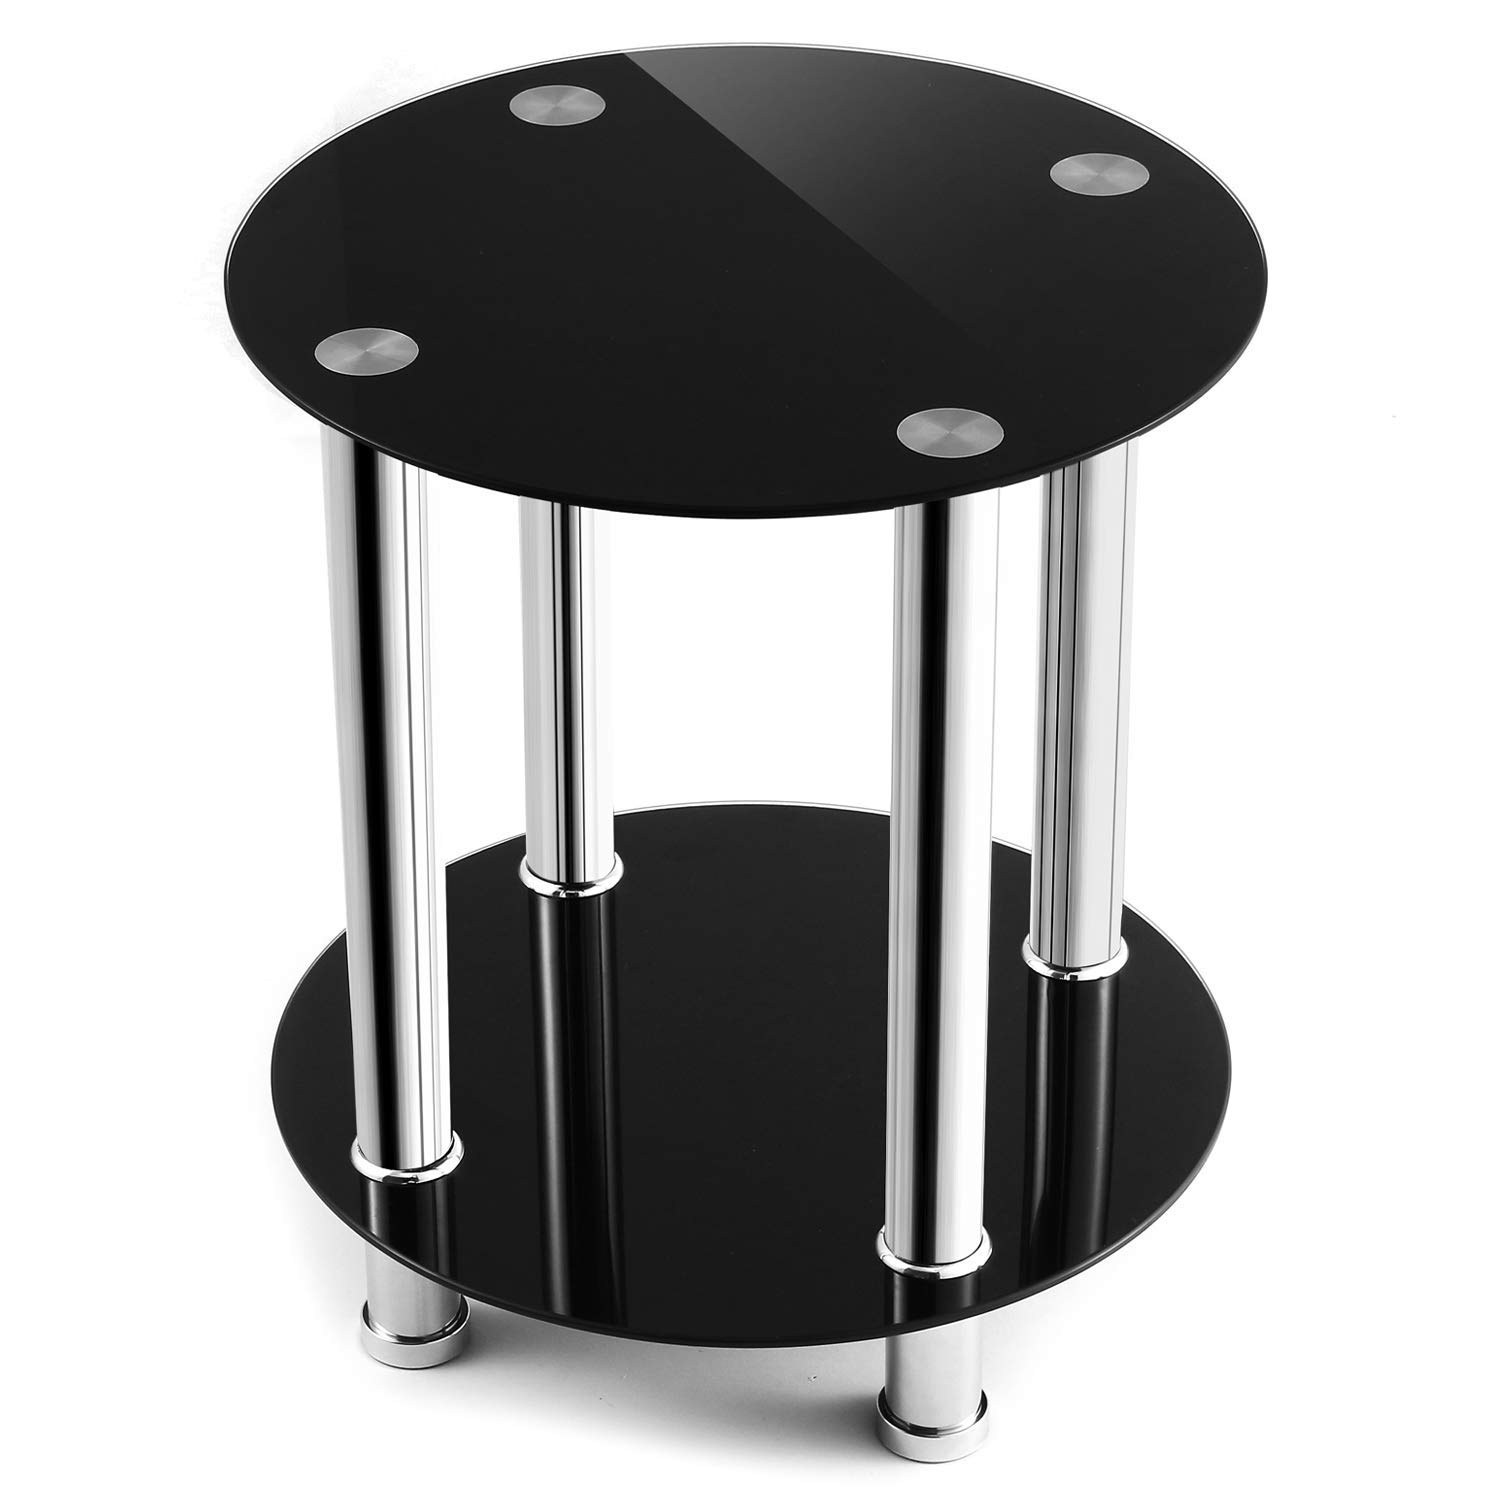 Black Safty Glass Coffee Table,End Table,Sofa Table, Night Stands,Round 39x39x45(H) cm